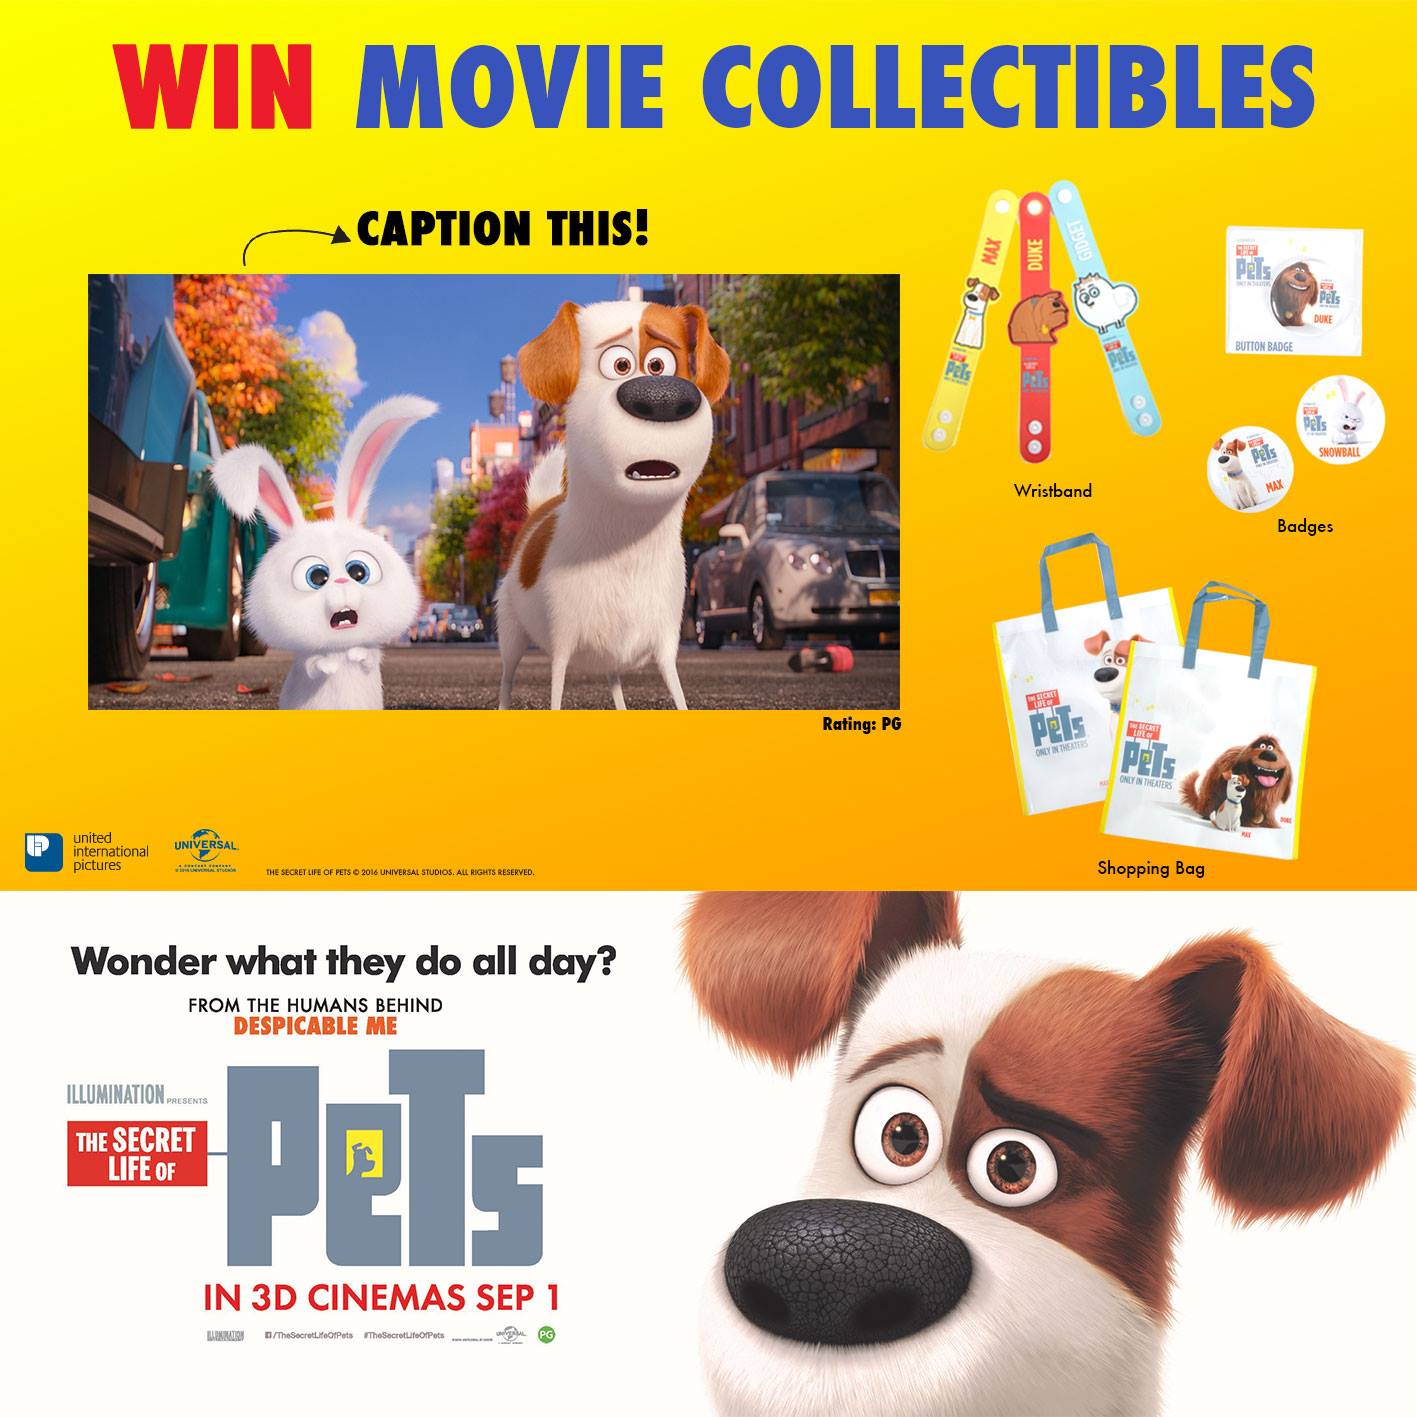 Cathay Cineplexes Singapore The Secret Life of Pets Facebook Contest ends 11 Sep 2016